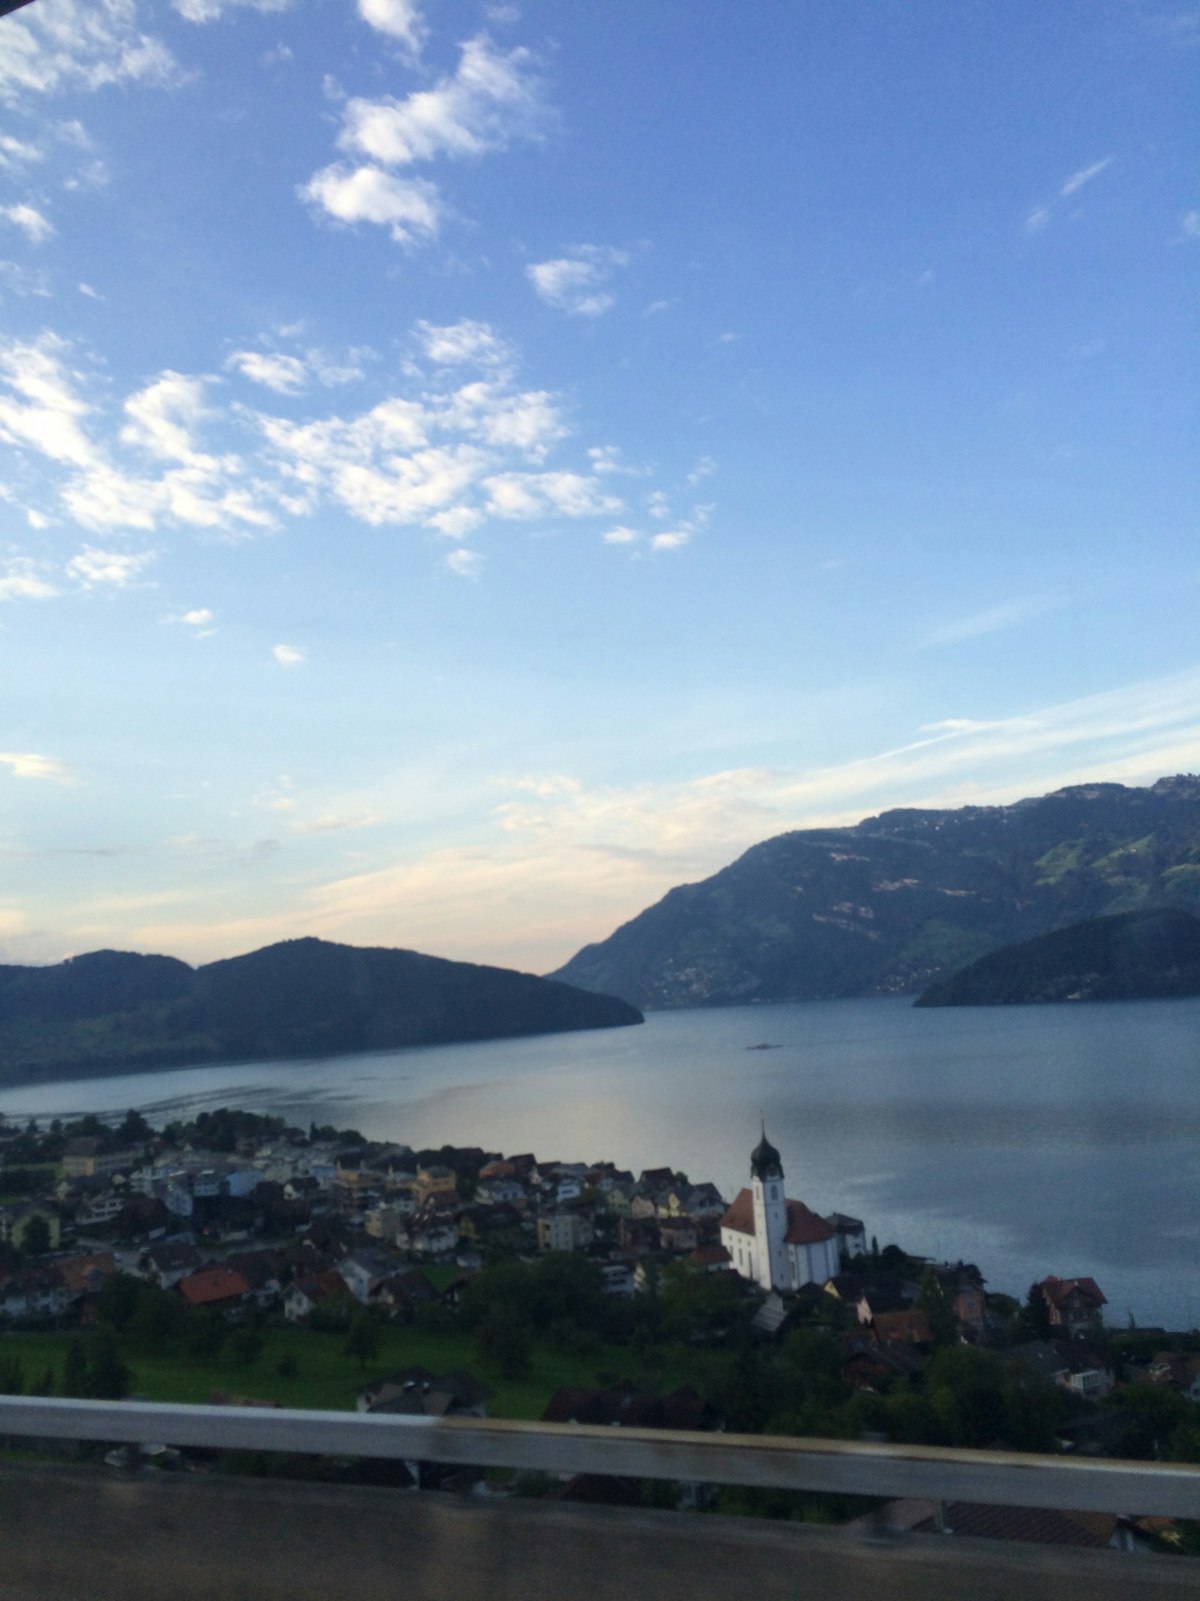 featured image - Switzerland, not Silicon, is the valley incubating Crypto Startups with friendly policies.